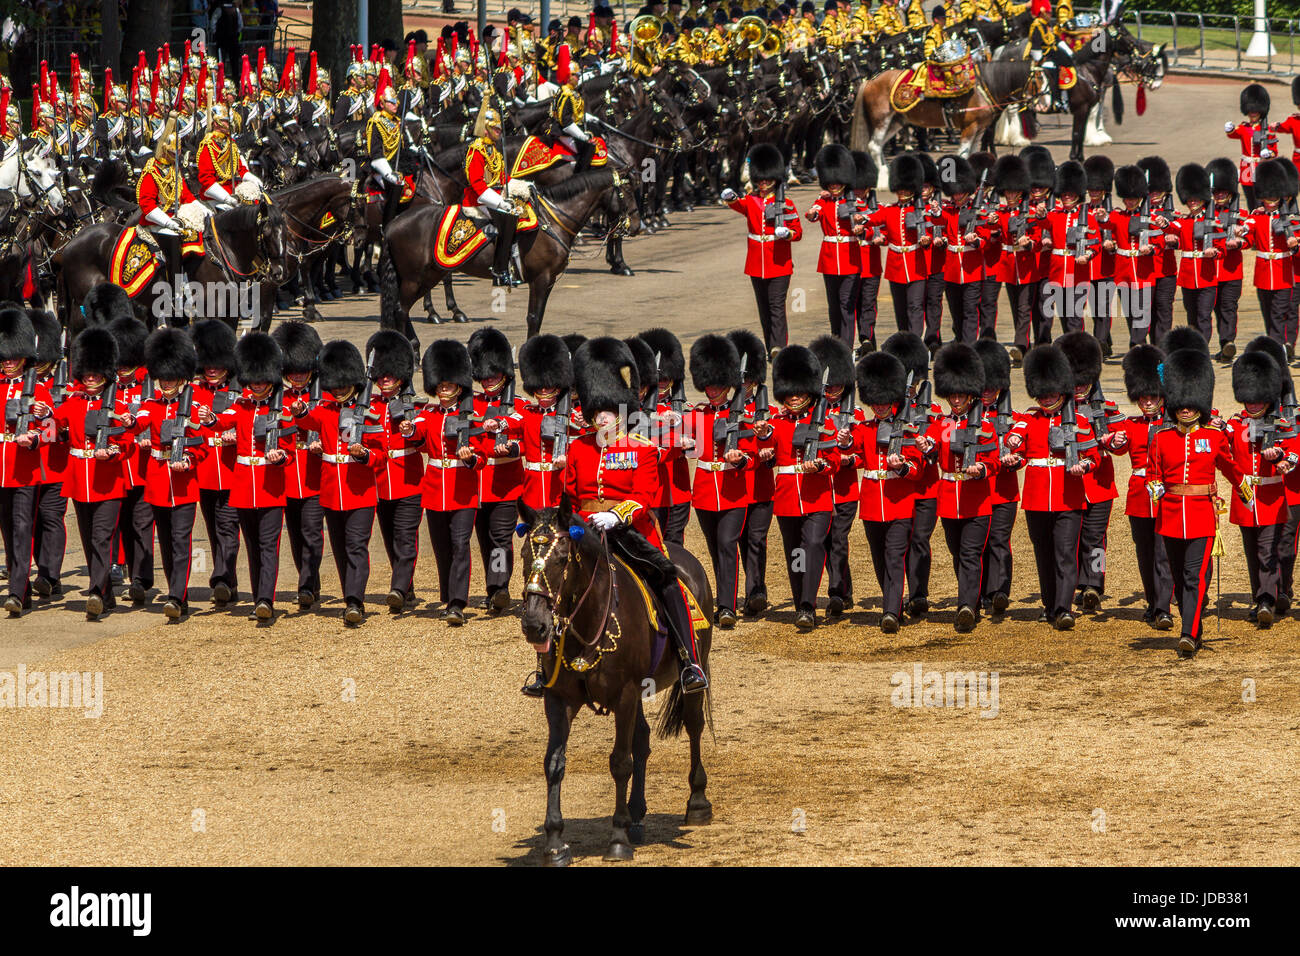 An officer on horseback leads The Irish Guards as they march on Horse Guards Parade at Trooping The Colour, London, UK , 2017 Stock Photo